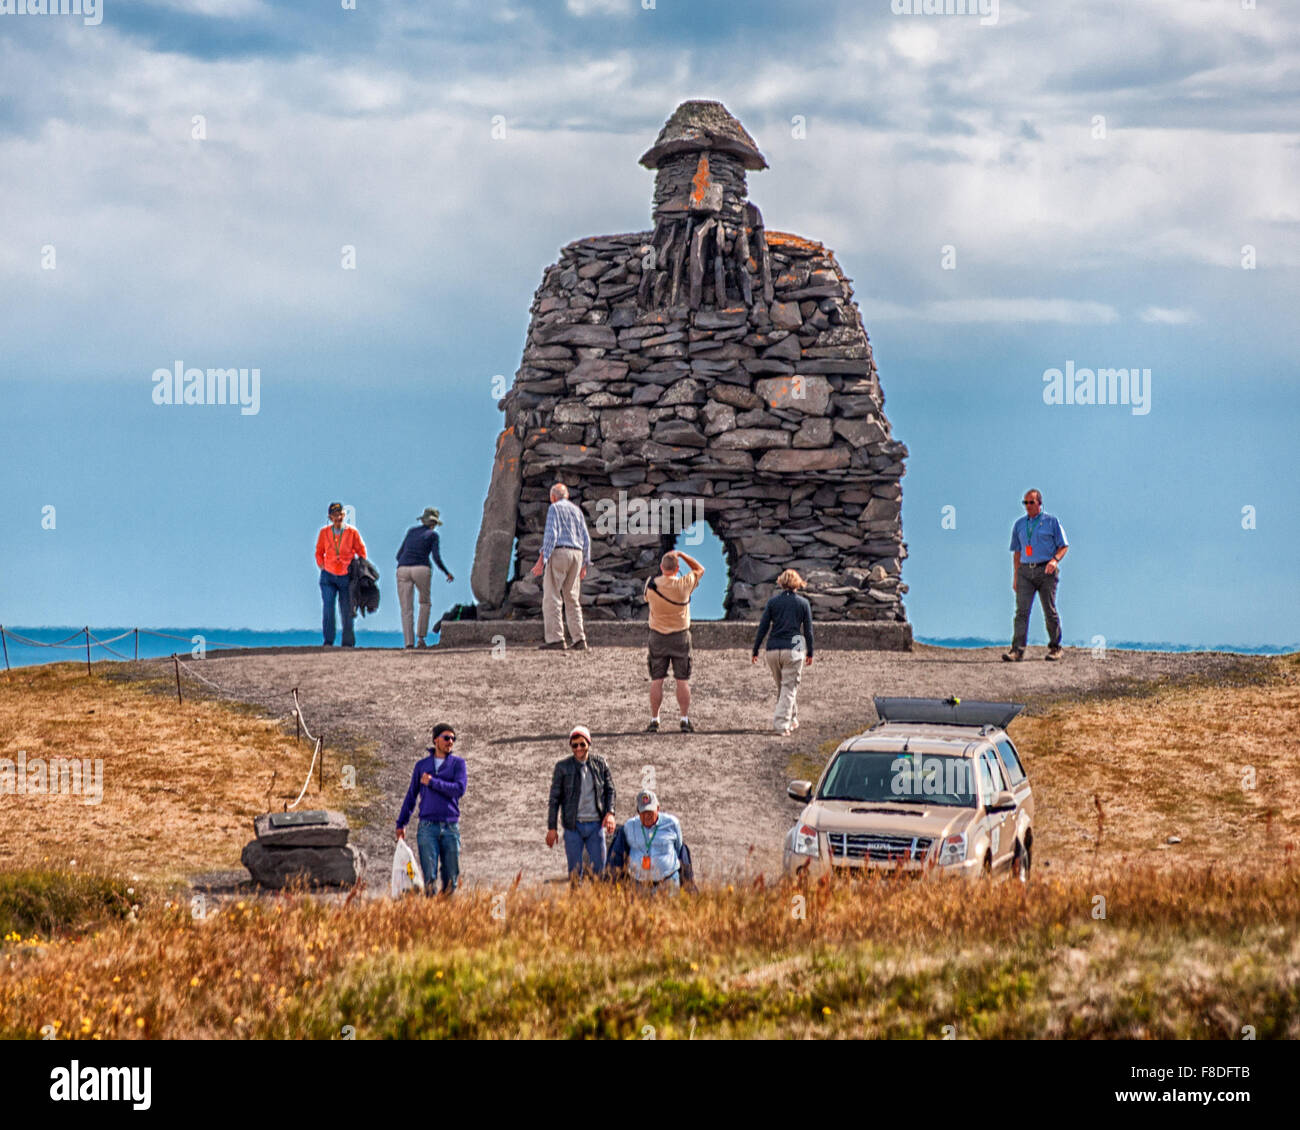 Arnarstapi, Snaefellsnes Peninsula, Iceland. 30th July, 2015. A group of tourists visit the huge stone structure of Bardur SnaefellsÃ¡s at Arnarstapi on the Snaefellsnes peninsula in West Iceland. By sculptor Ragnar Kjartansson, it relates to a late Icelander saga with legendary elements dating to the early 14th century. It is a favorite tourist destination. © Arnold Drapkin/ZUMA Wire/Alamy Live News Stock Photo